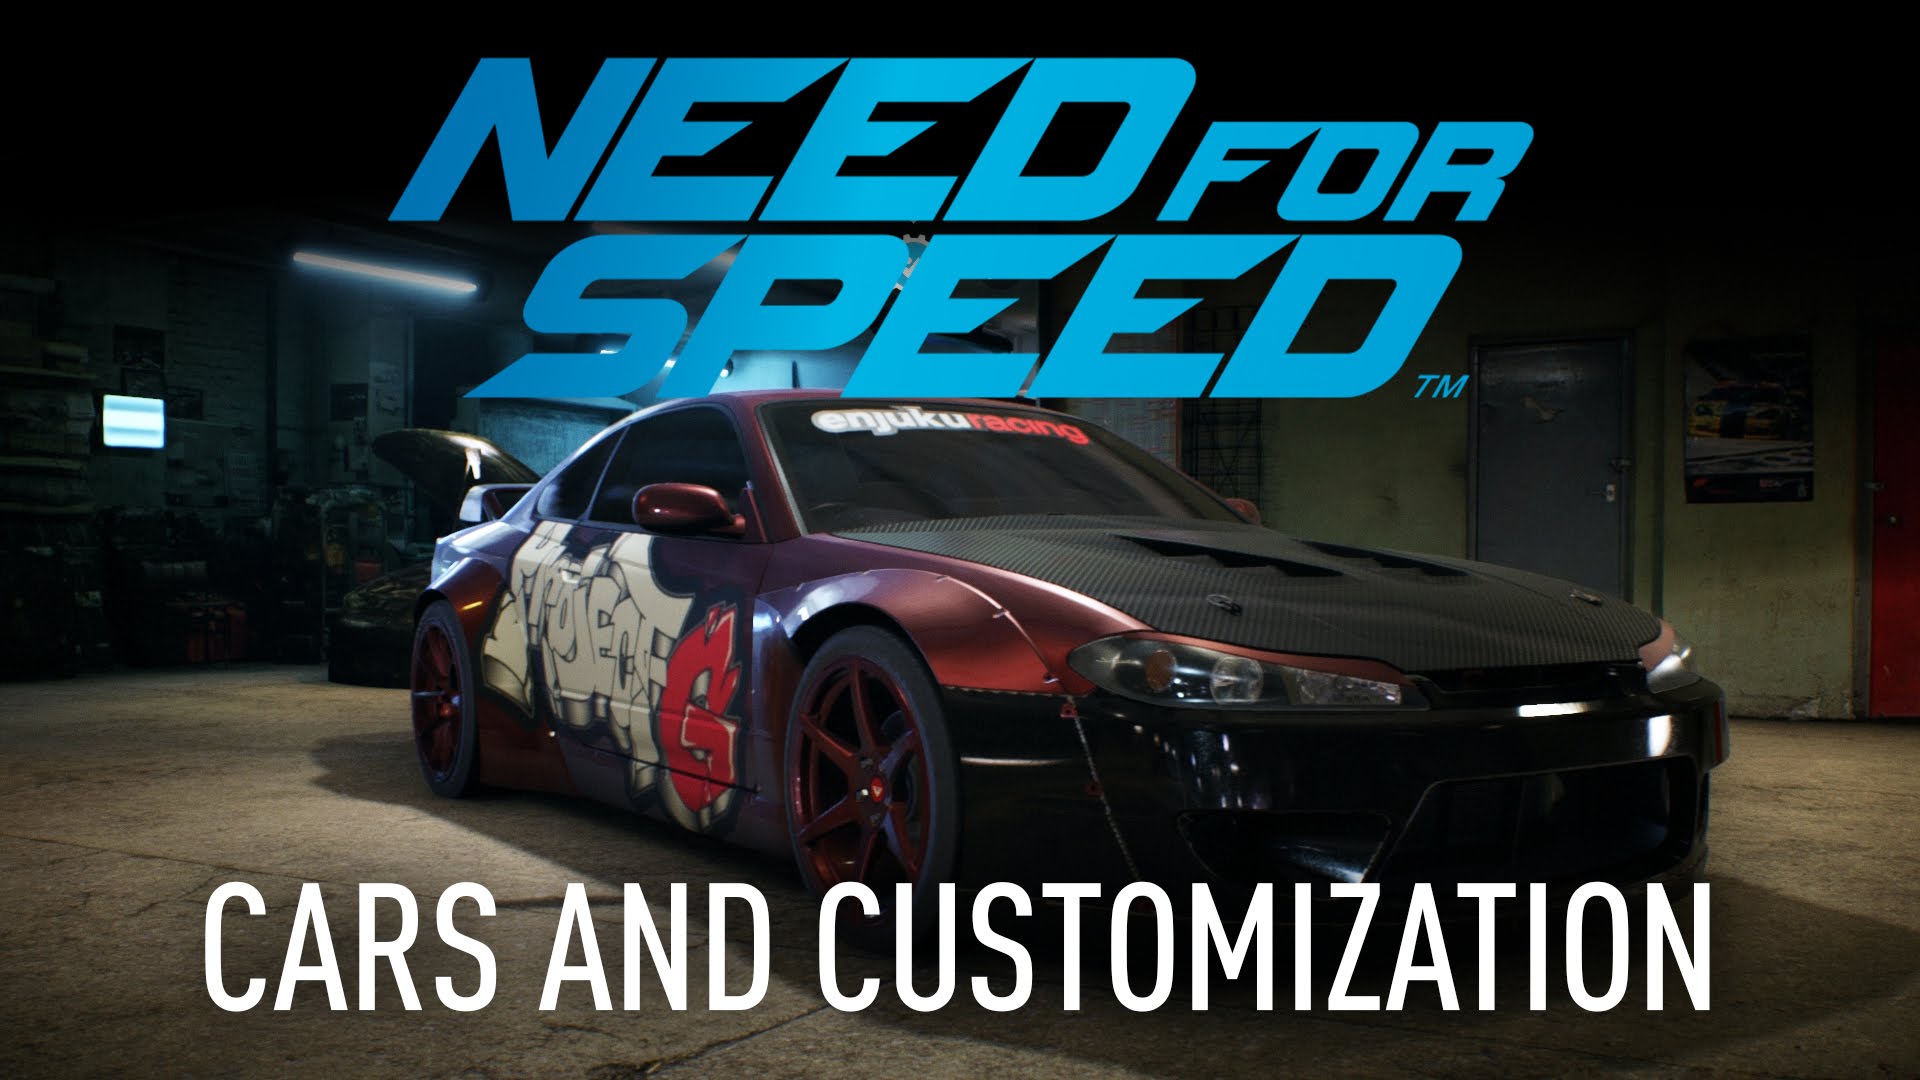 New Need For Speed Trailer Shows Off Customization